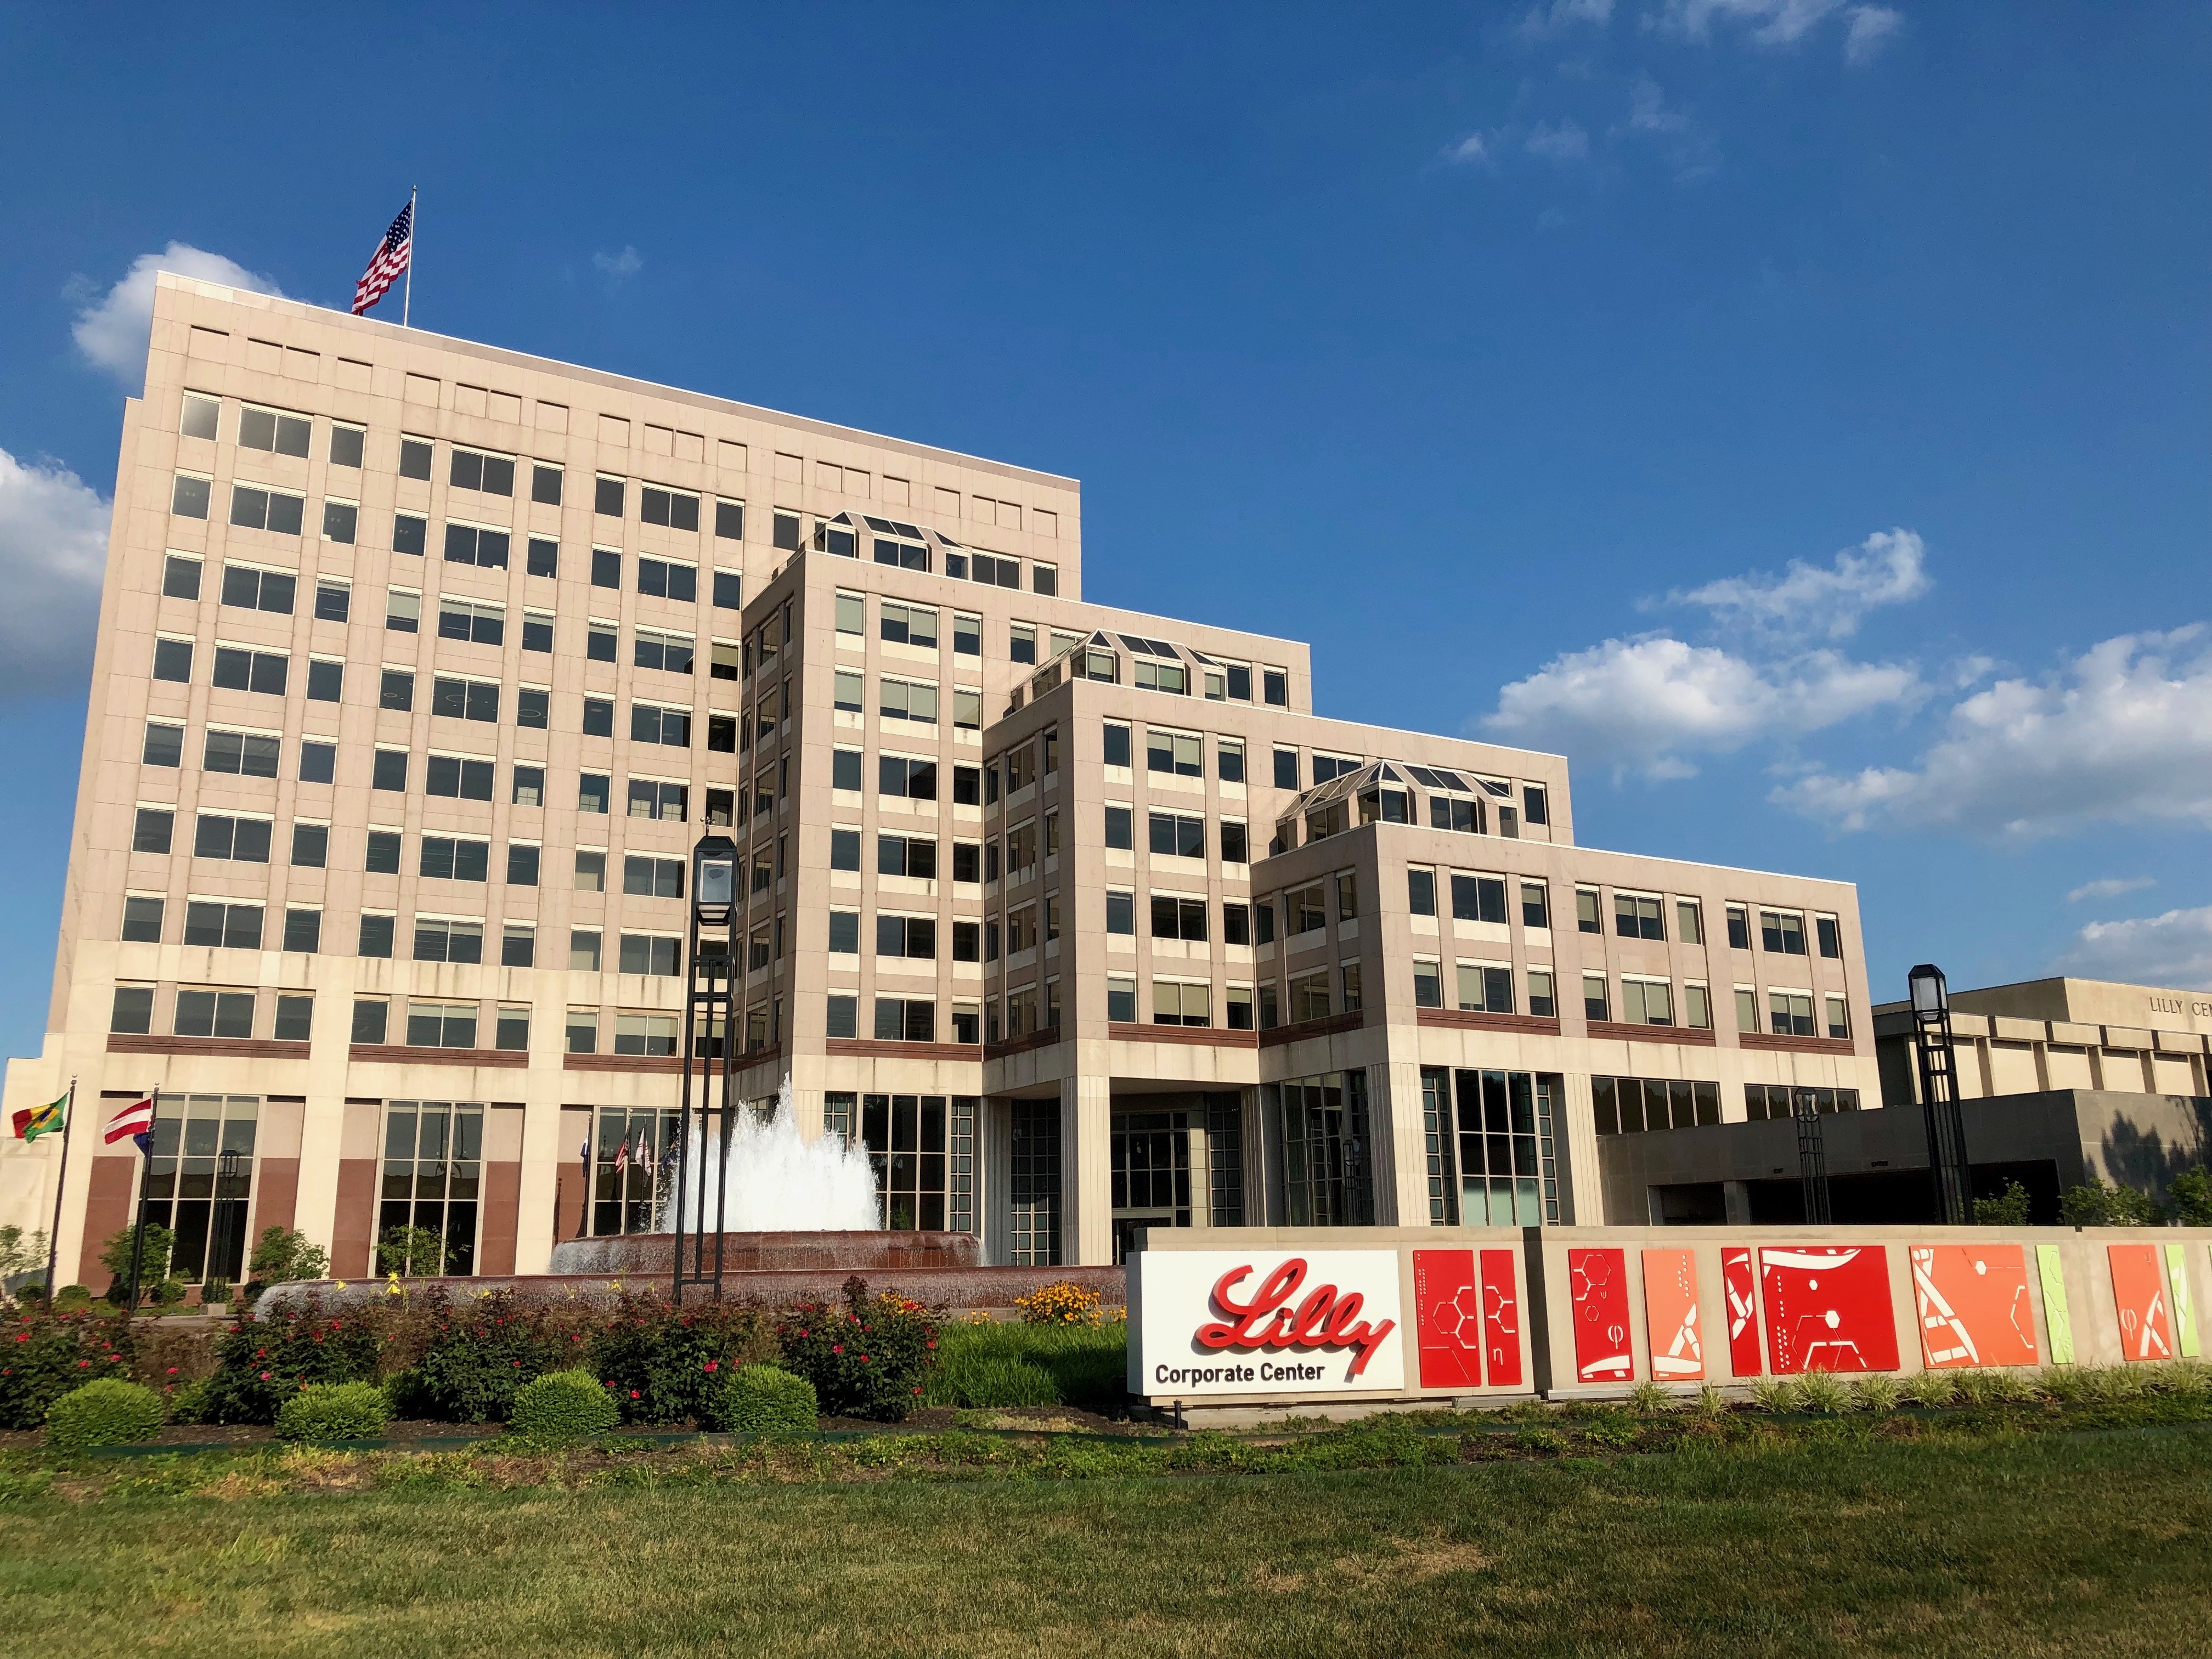 Health News Roundup: Eli Lilly ordered to pay $176.5 million to Teva in U.S. migraine drug patent trial; CanSino's inhalable COVID-19 vaccines to be available in Tianjin from Nov 10 and more 